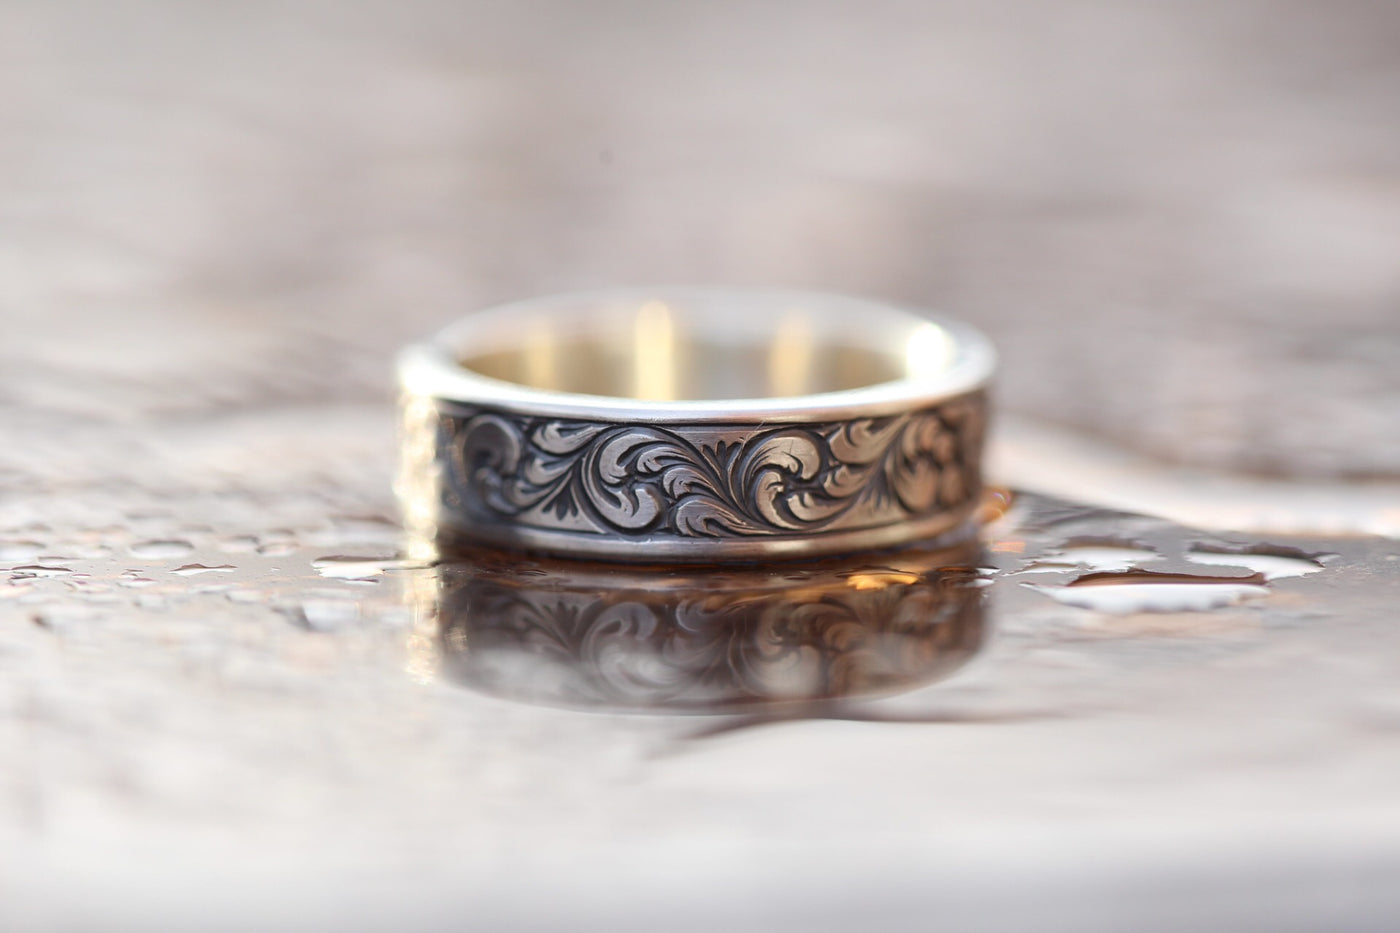 Hand engraved ring